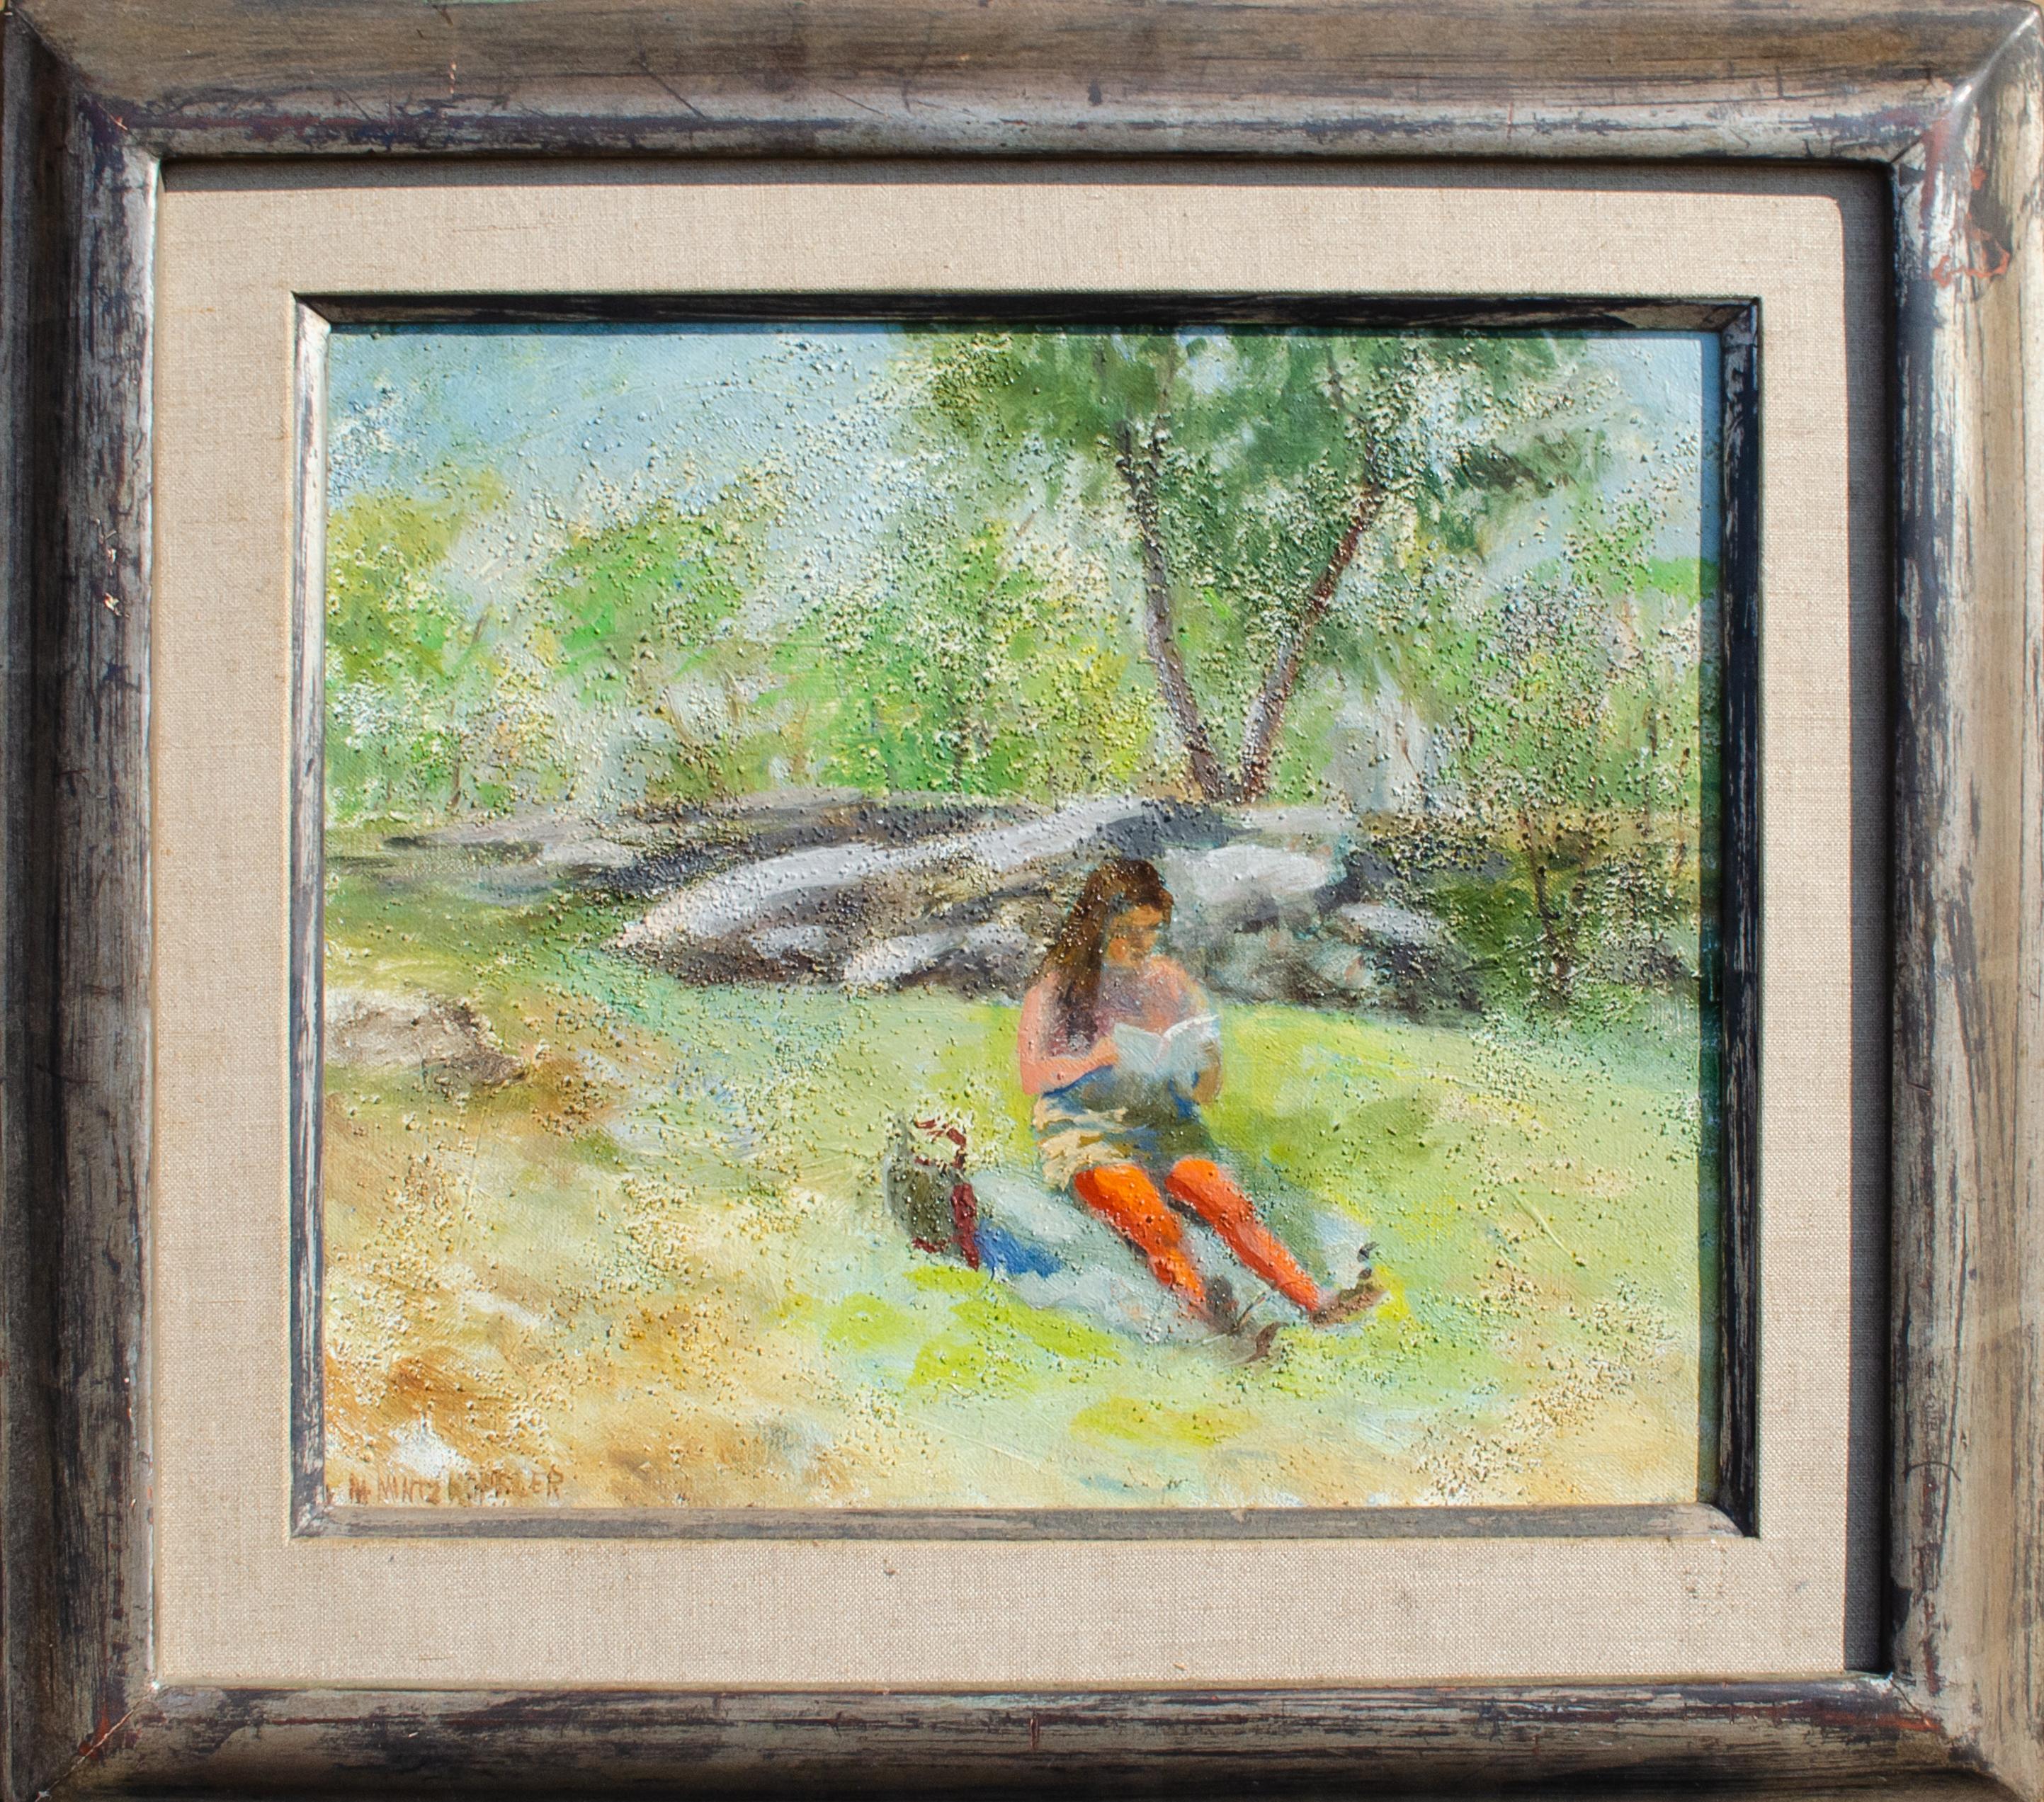 Mary Mintz Koffler (American, 1906-1985)
Noon in Central Park, c. 1950
Oil on canvas
12 1/2 x 14 1/4 in.
Framed: 18 x 20 in.
Signed lower left
Inscribed verso

Mary Mintz Koffler was an American painter (New York, New Jersey) best known for her